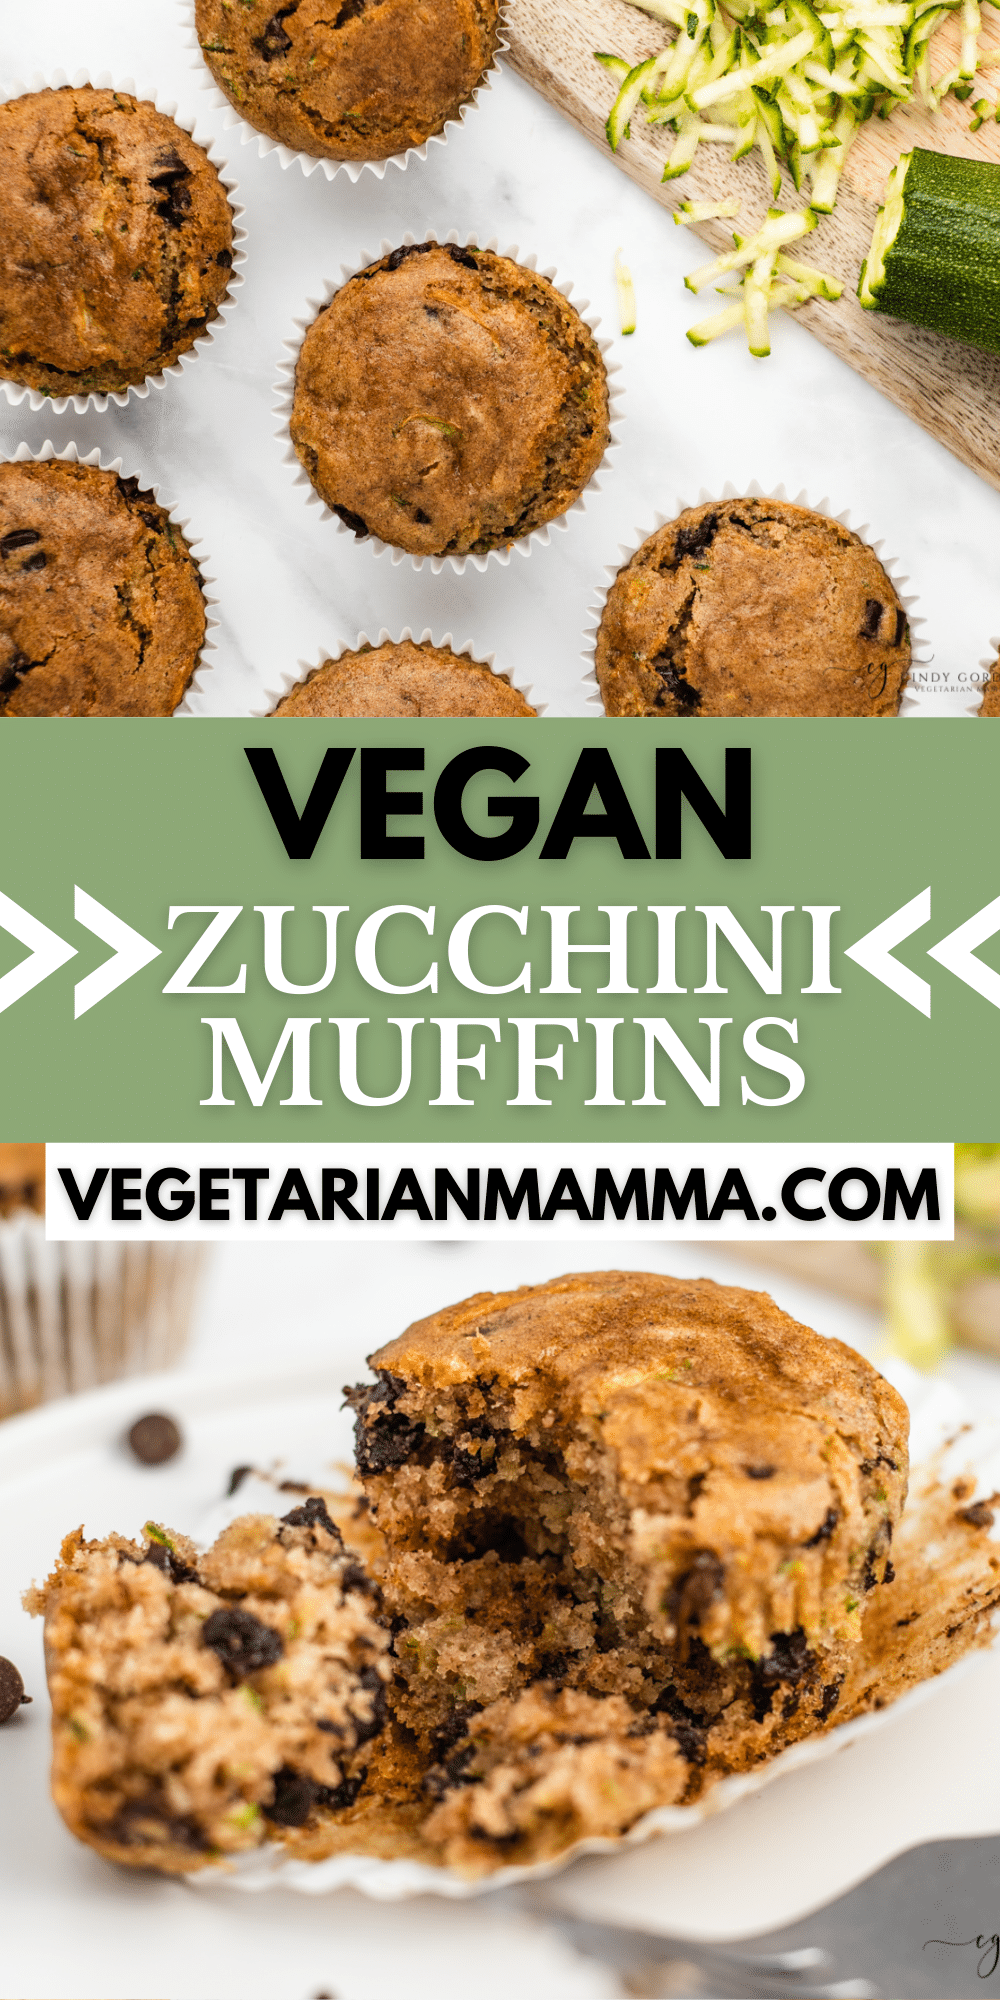 Overhead shot of zucchini muffins and a partially eaten muffin with overlay text